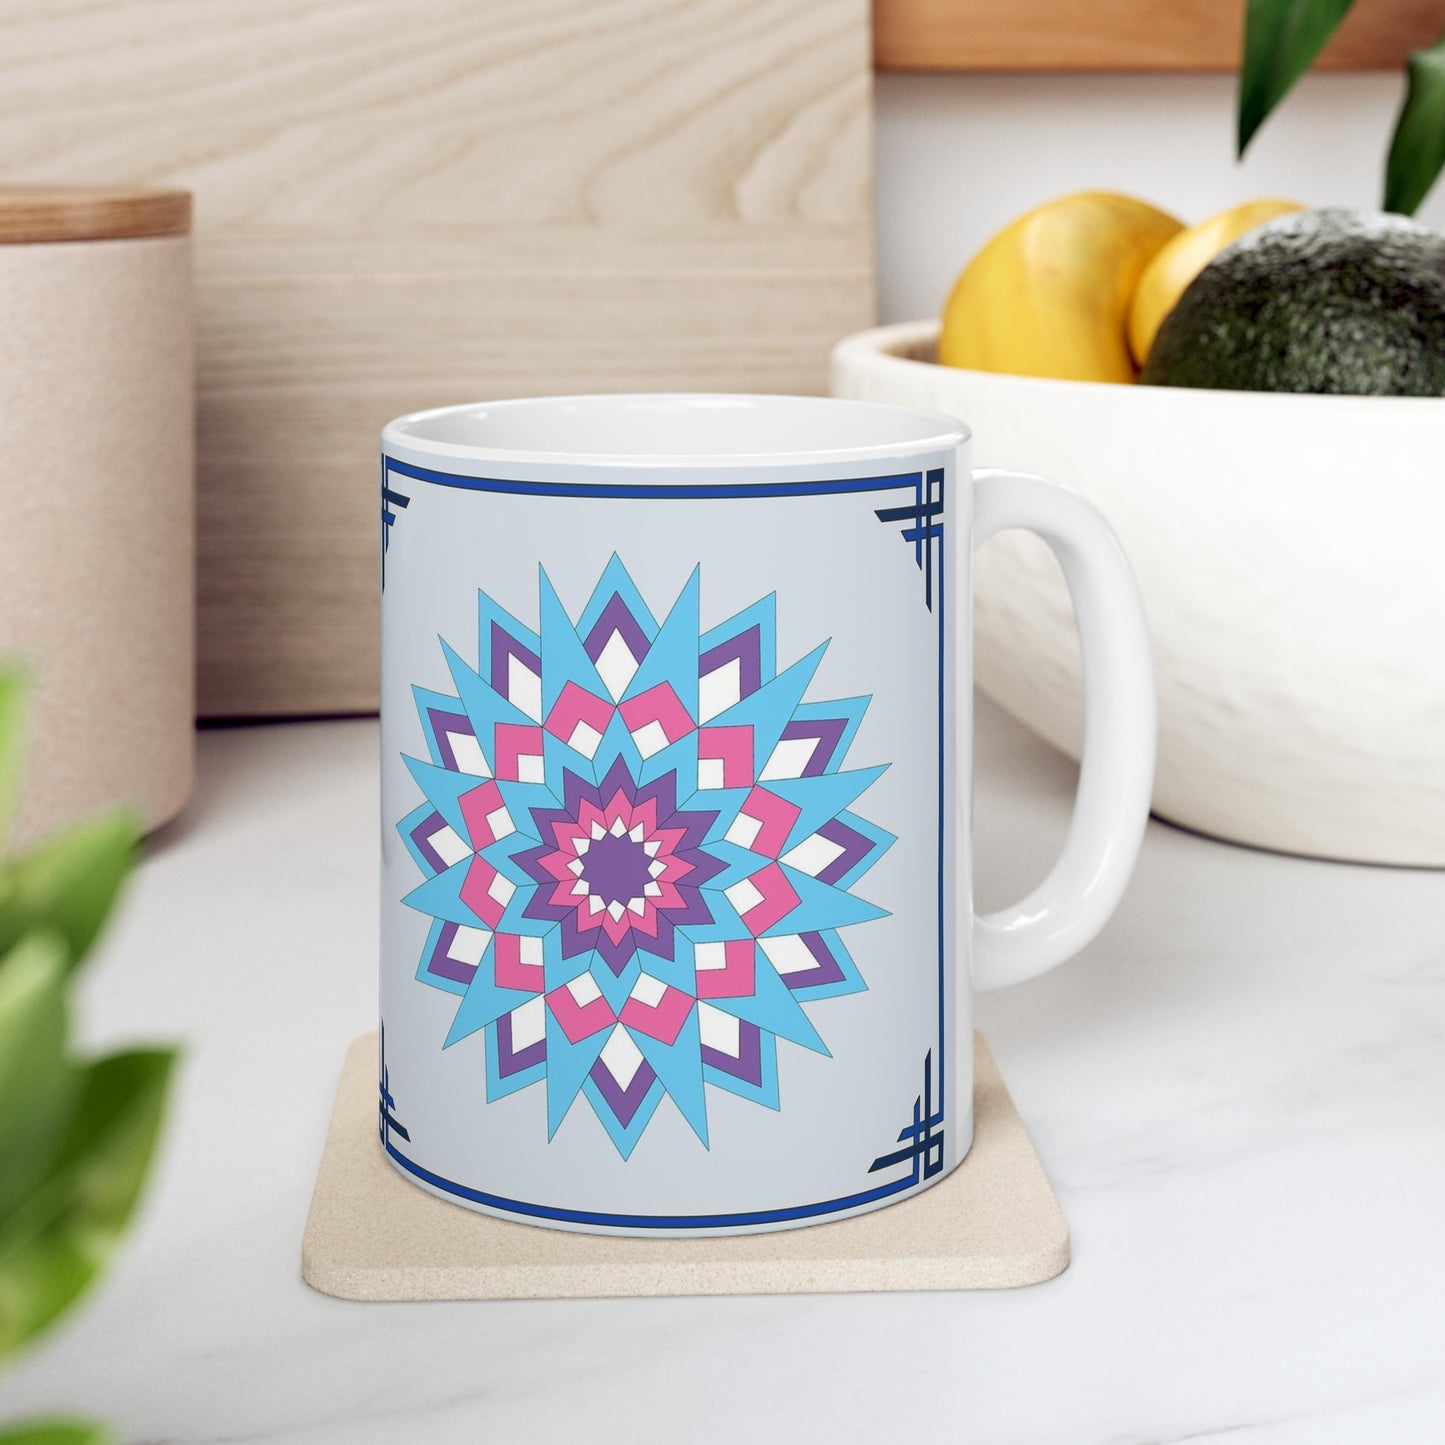 Enjoy a cup of your favorite hot beverage as you plan your new quilting project! The Star Burst Quilt Design 11 oz. Mug is a reproduction of a fine art design by artist Lee M. Buchanan and has the image on the front and back of the mug. This colorful design blends shades of red, blue and white into a classic star design.  If you love to quilt or appreciate the style and craftsmanship involved, this mug will be a favorite part of your quilting enjoyment!